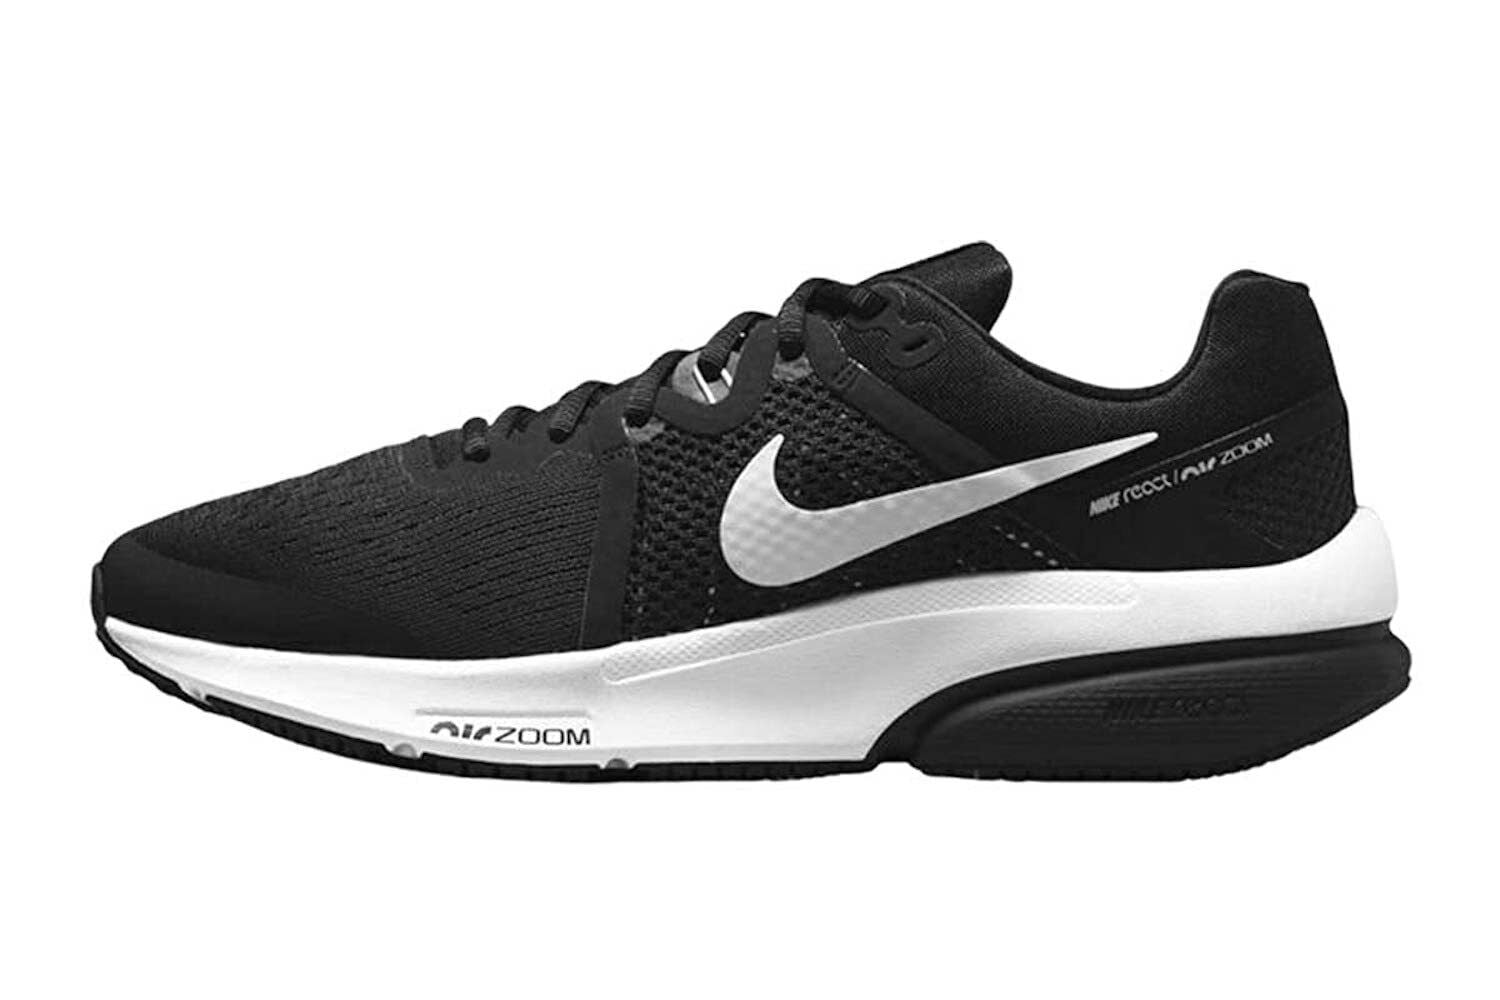 Nike Men's Zoom Prevail running Shoes DA1102 001 size 11 US New in Box ...